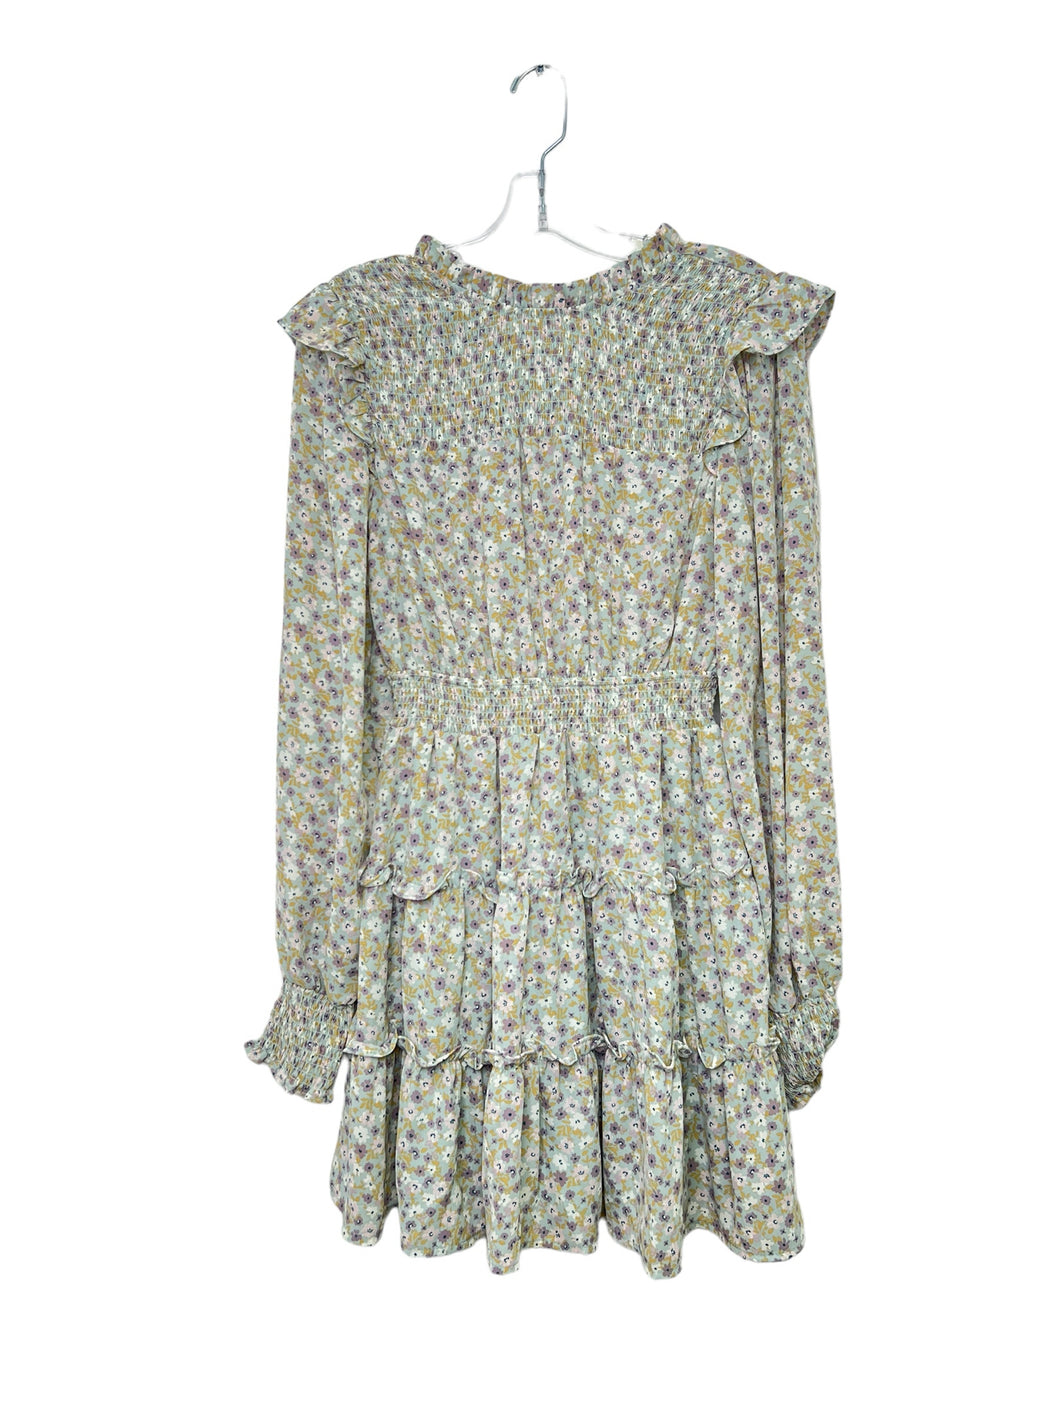 Size Small Blue Floral Dress- Ladies